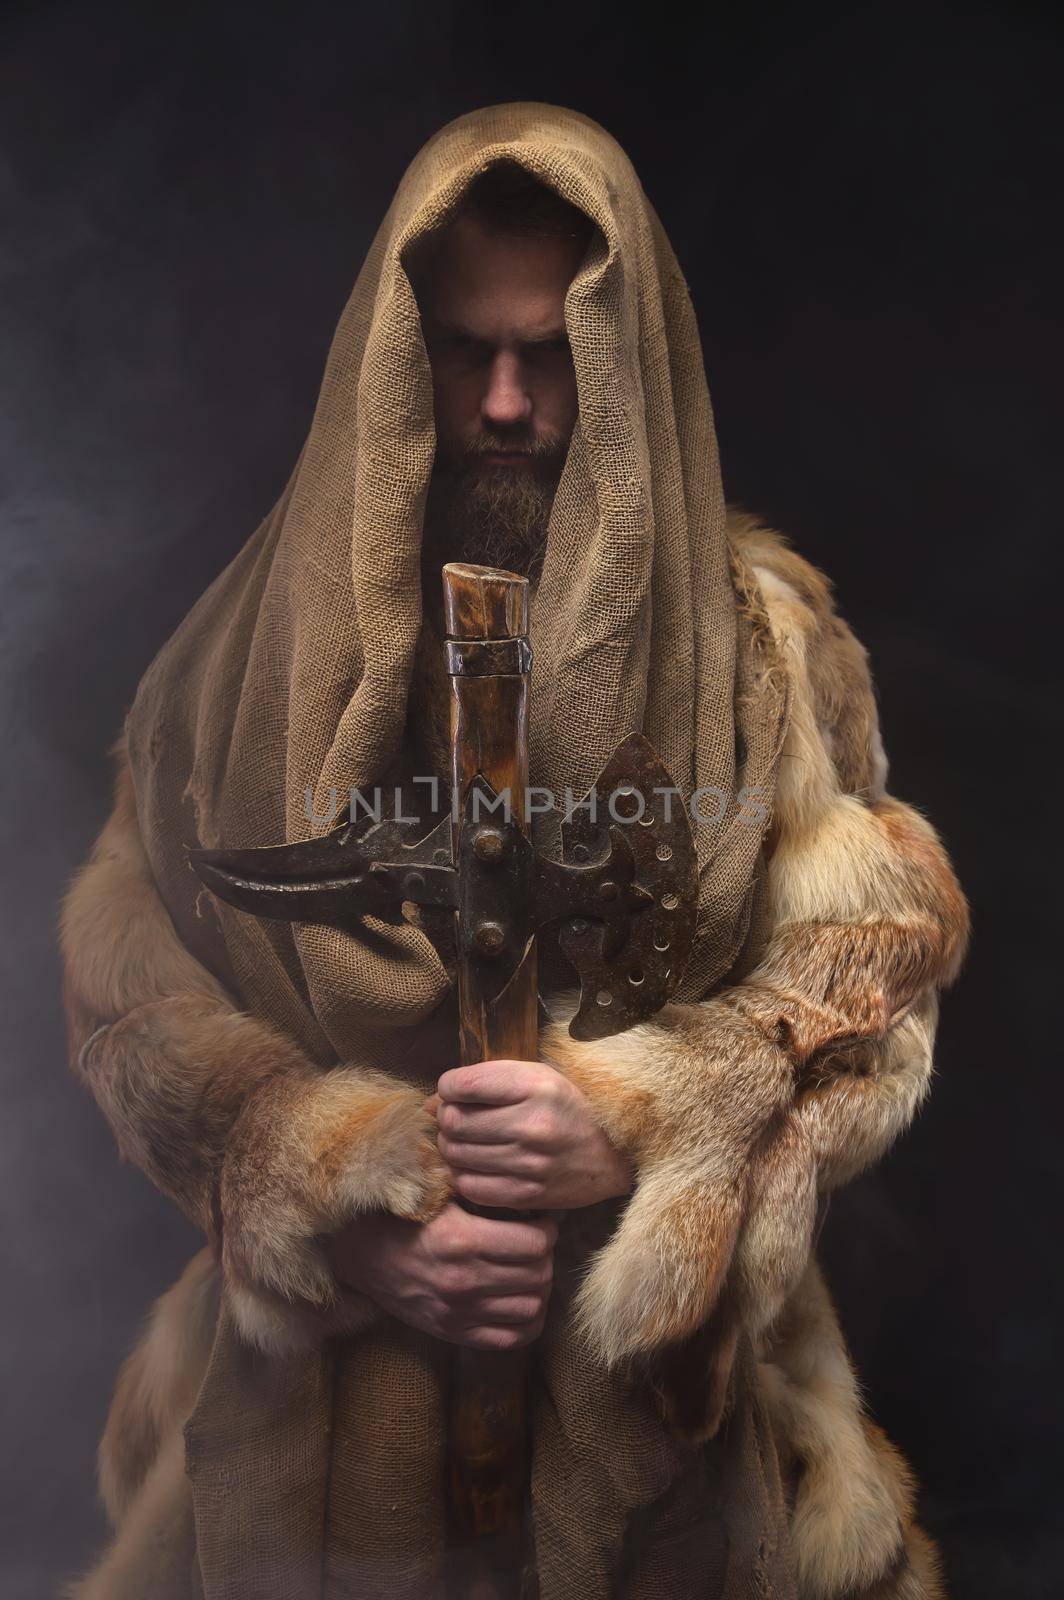 portrait of a brave serious man, a medieval warrior or a monk in a robe, holding an ax, on a dark background. Comparison of eras, history, Renaissance style.